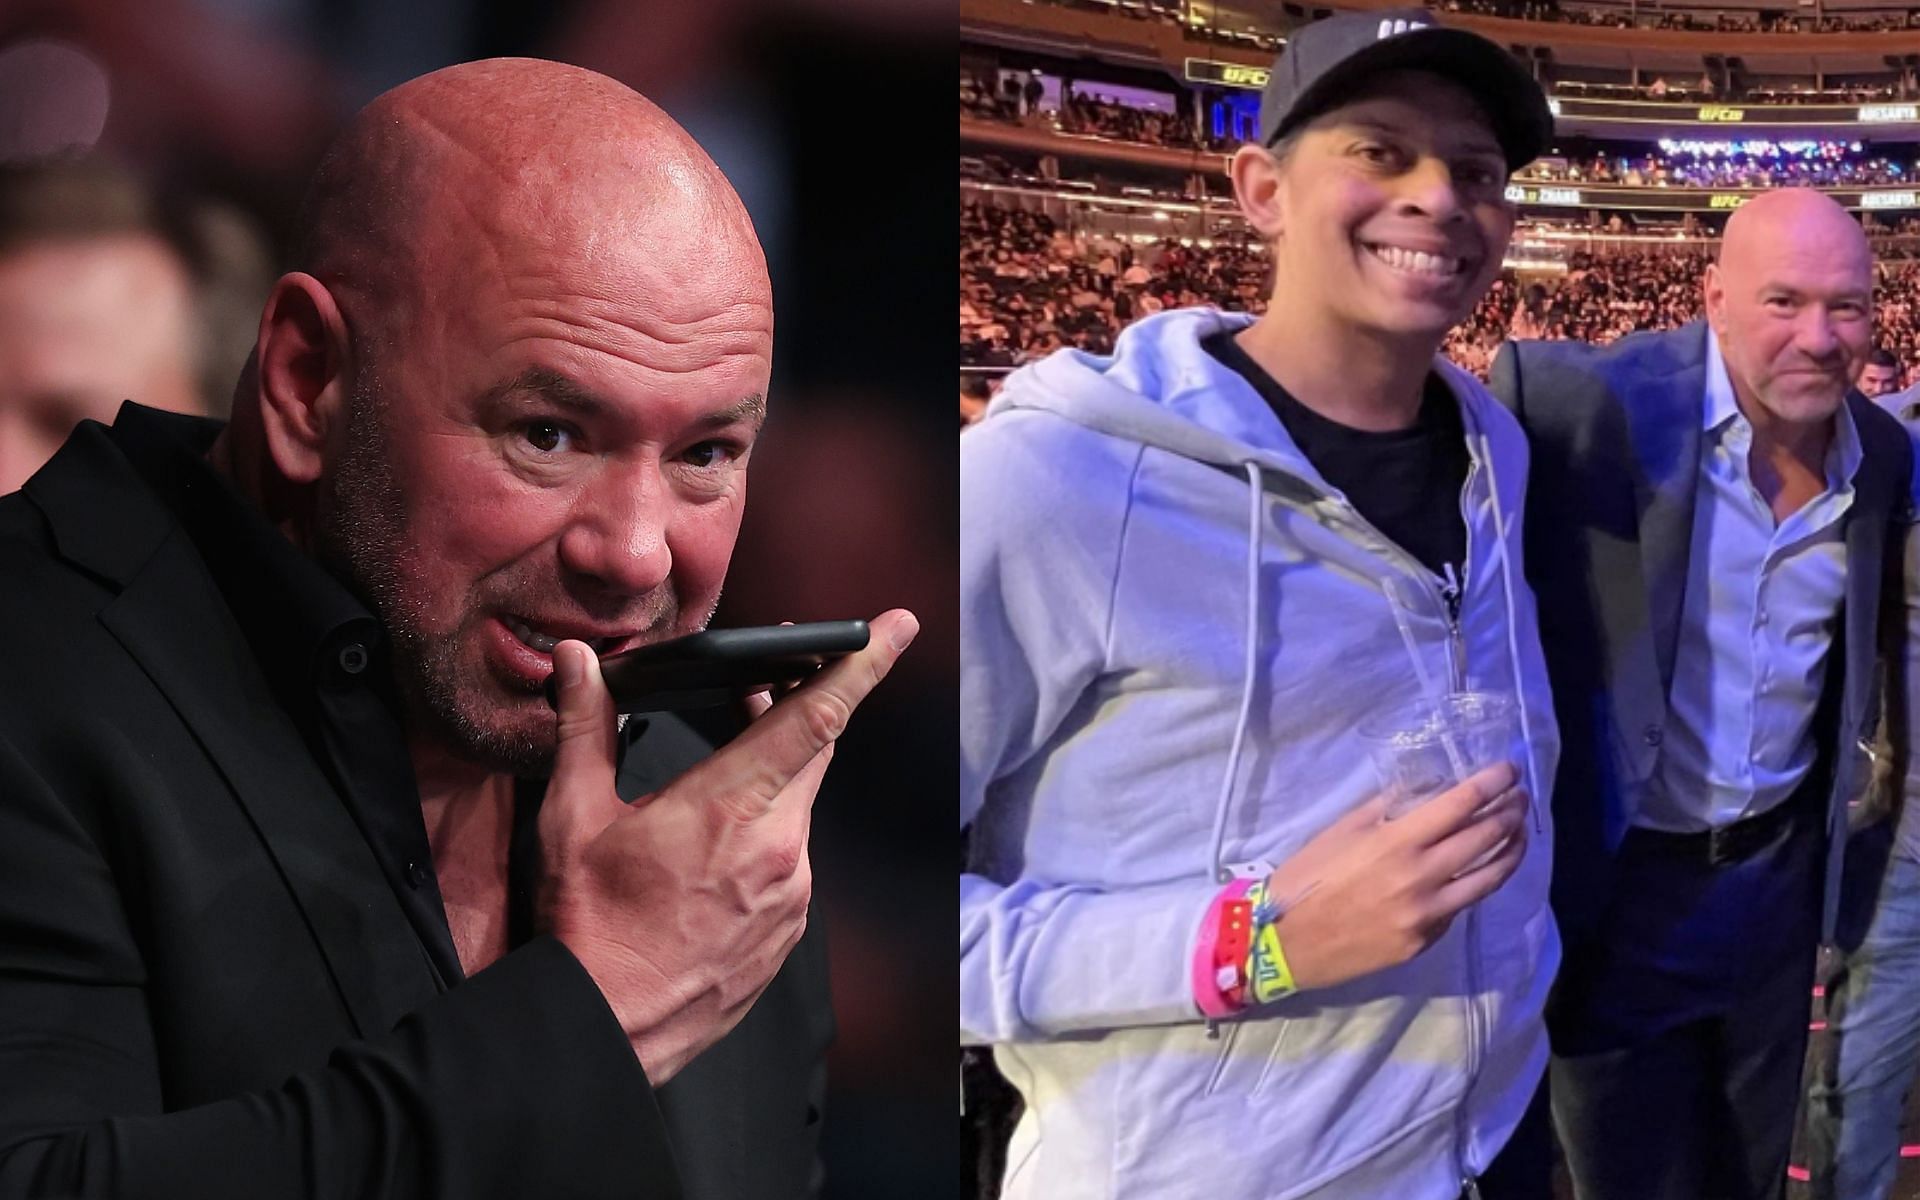 Dana White (left) and with the fan (right). [Images courtesy: left image from Getty Images and right image from Imgur @ifroodle]